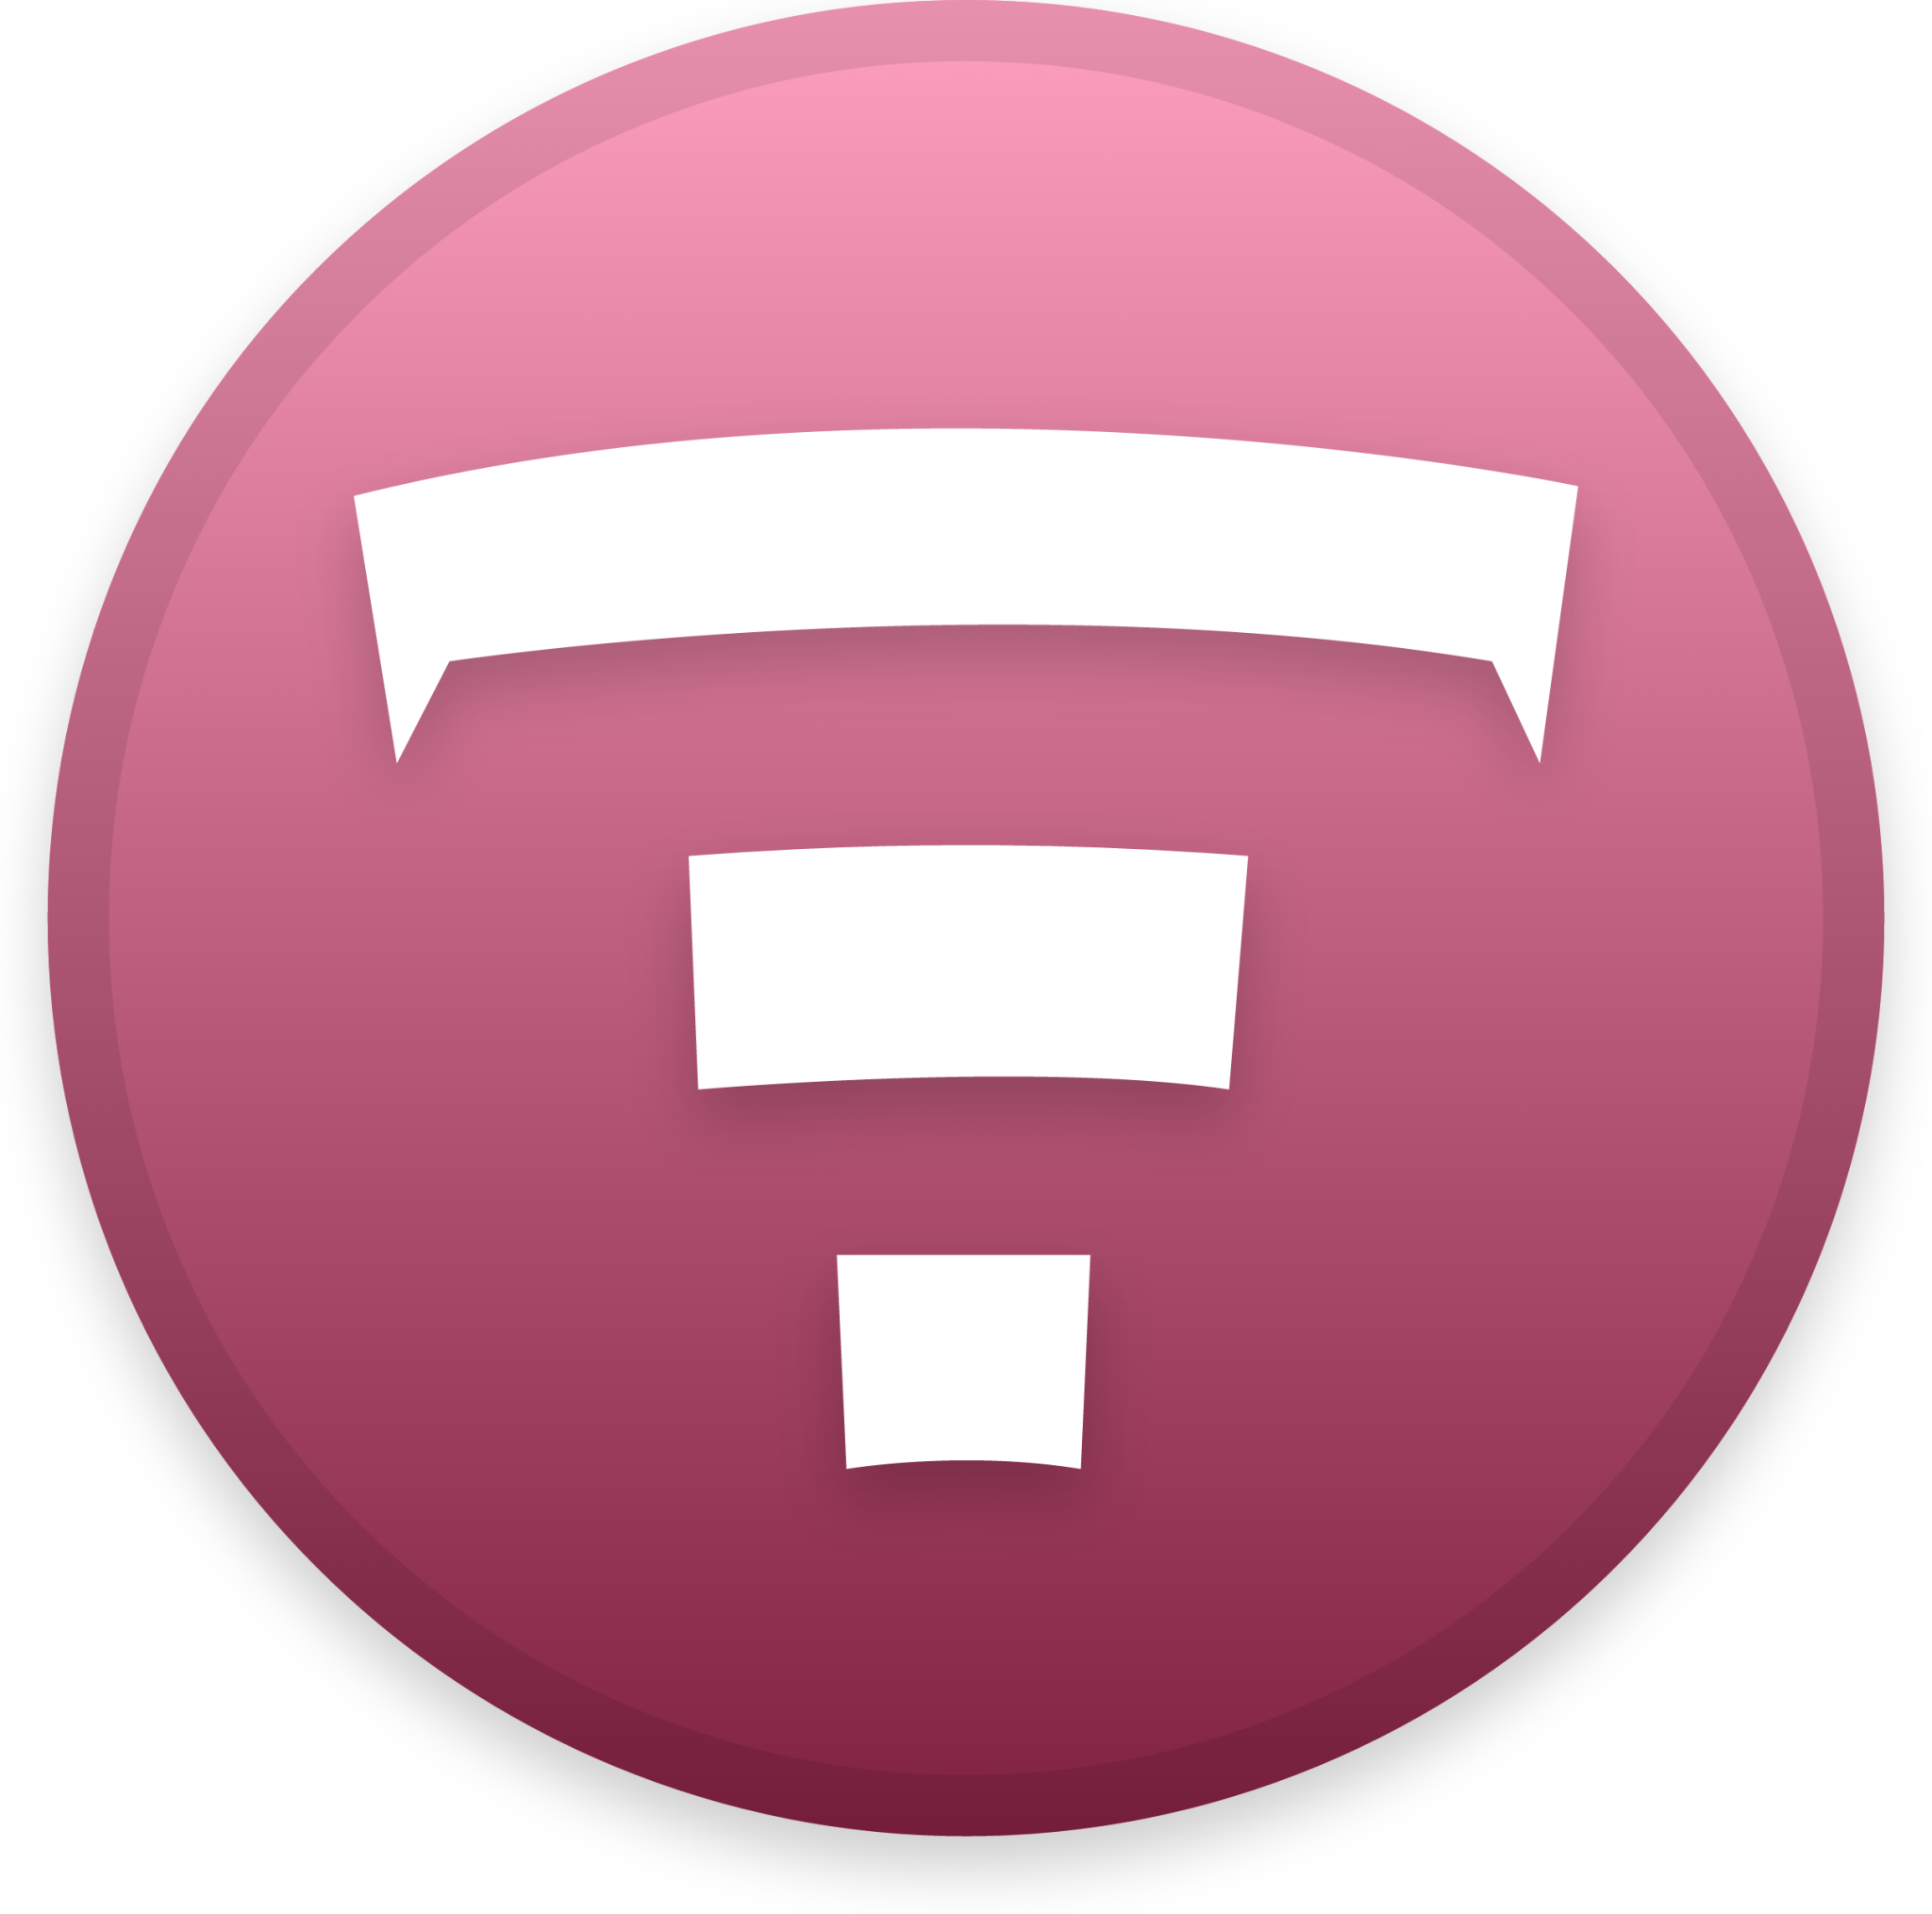 Tierion Cryptocurrency icon